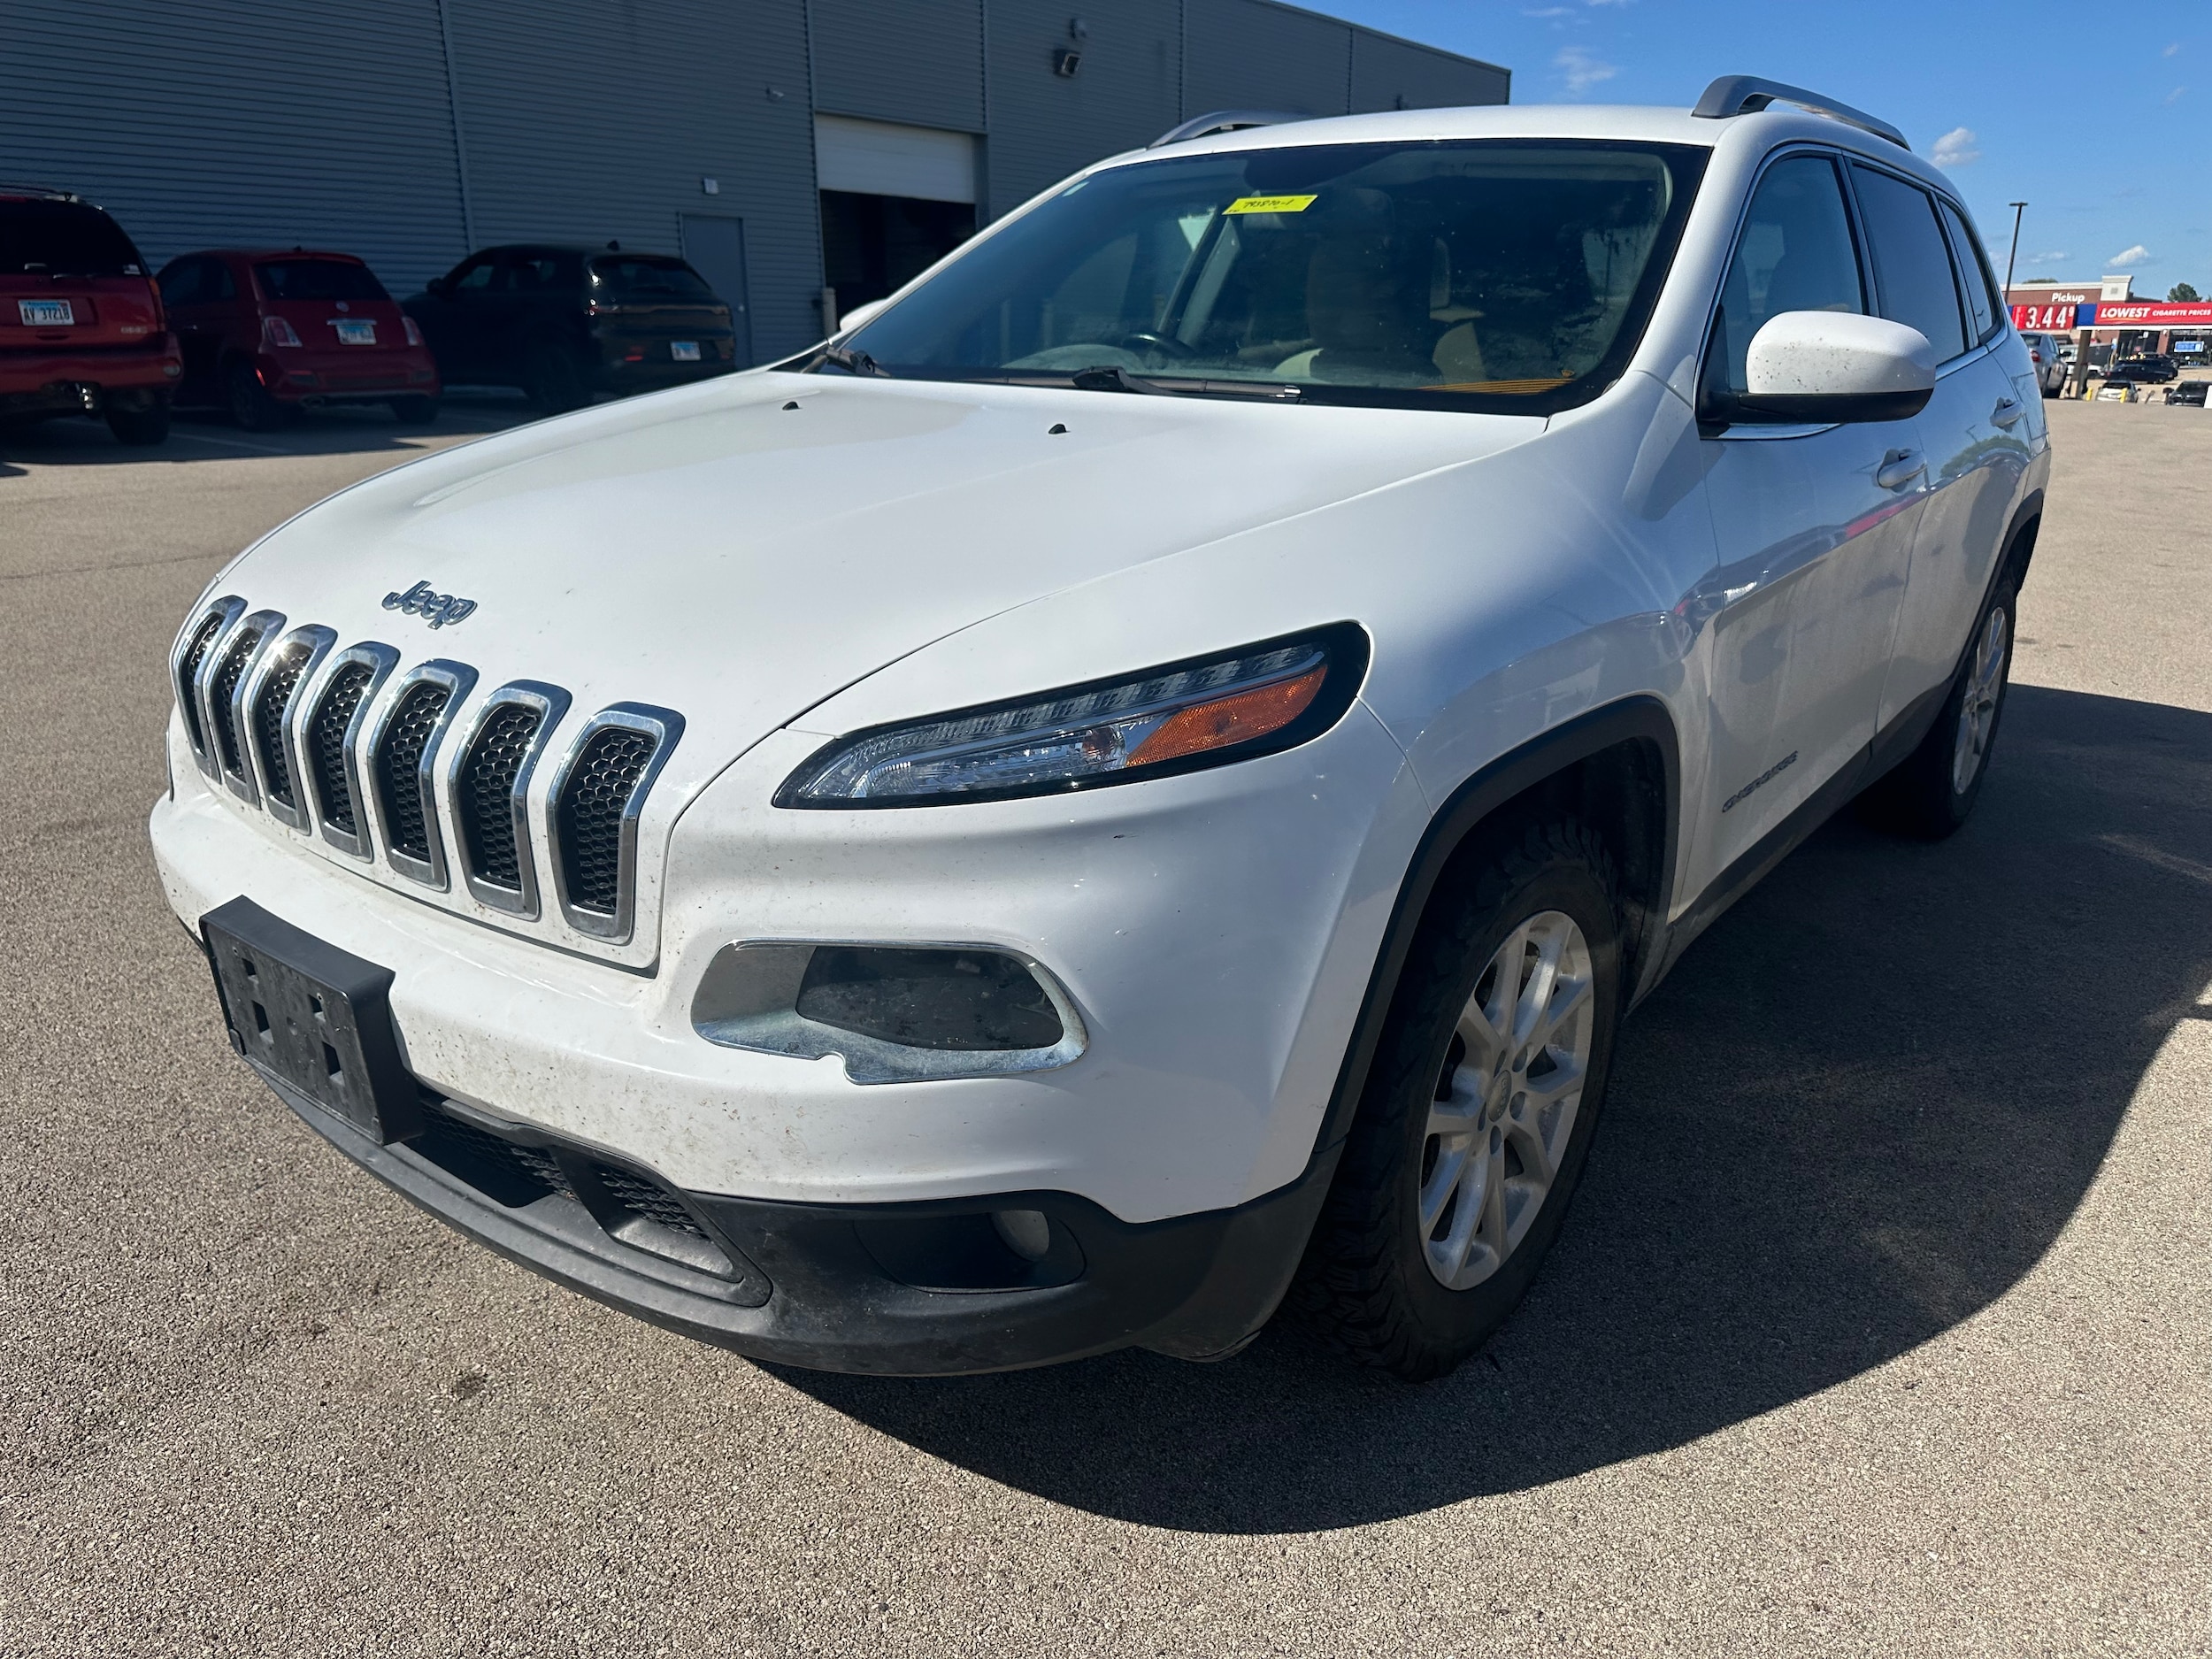 Used 2015 Jeep Cherokee Latitude with VIN 1C4PJMCS7FW793870 for sale in Galena, IL